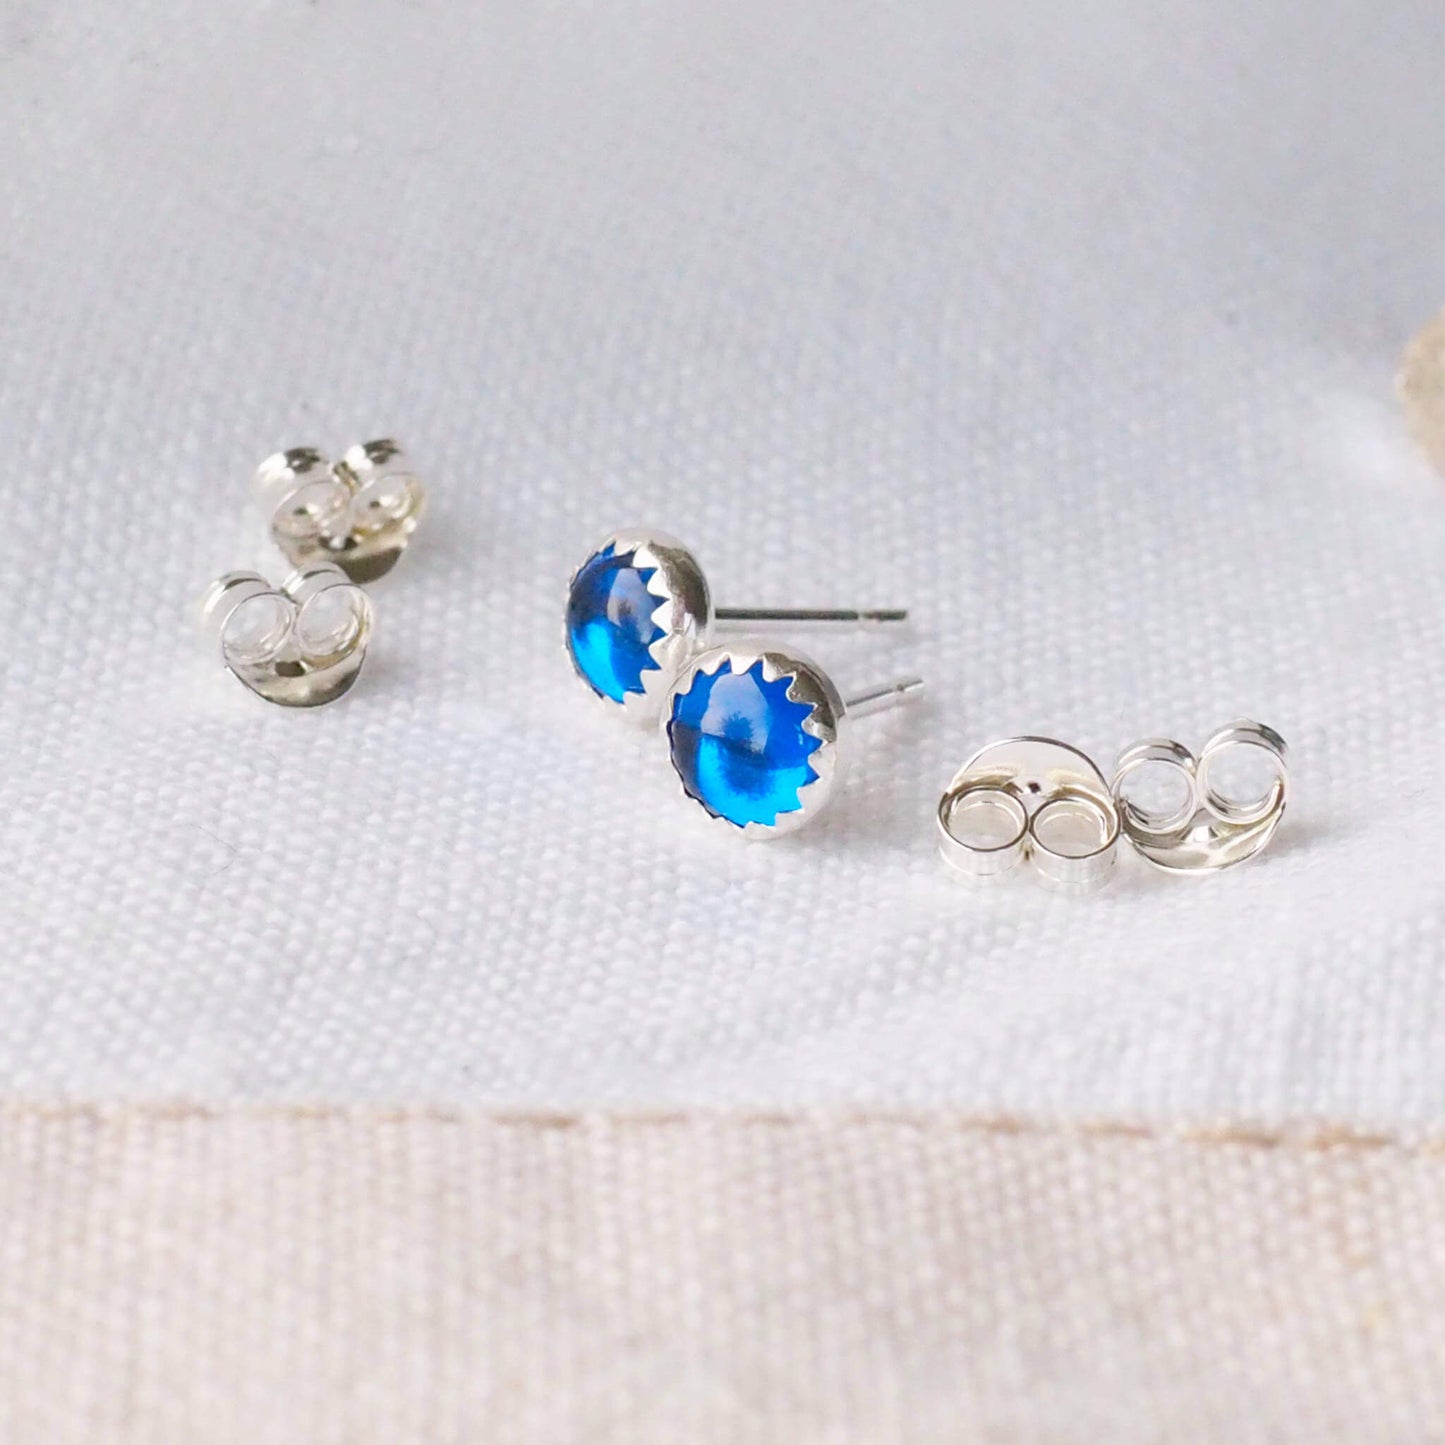 Pair of Sapphire Blue and Silver Gemstone studs with a round cabochon gemstone set into a simple sterling silver mount. the earrings are round measuring 5 mm in diameter and are pictured on a white linen background with earring backs at the side. Handcrafted by maram jewellery in Scotland